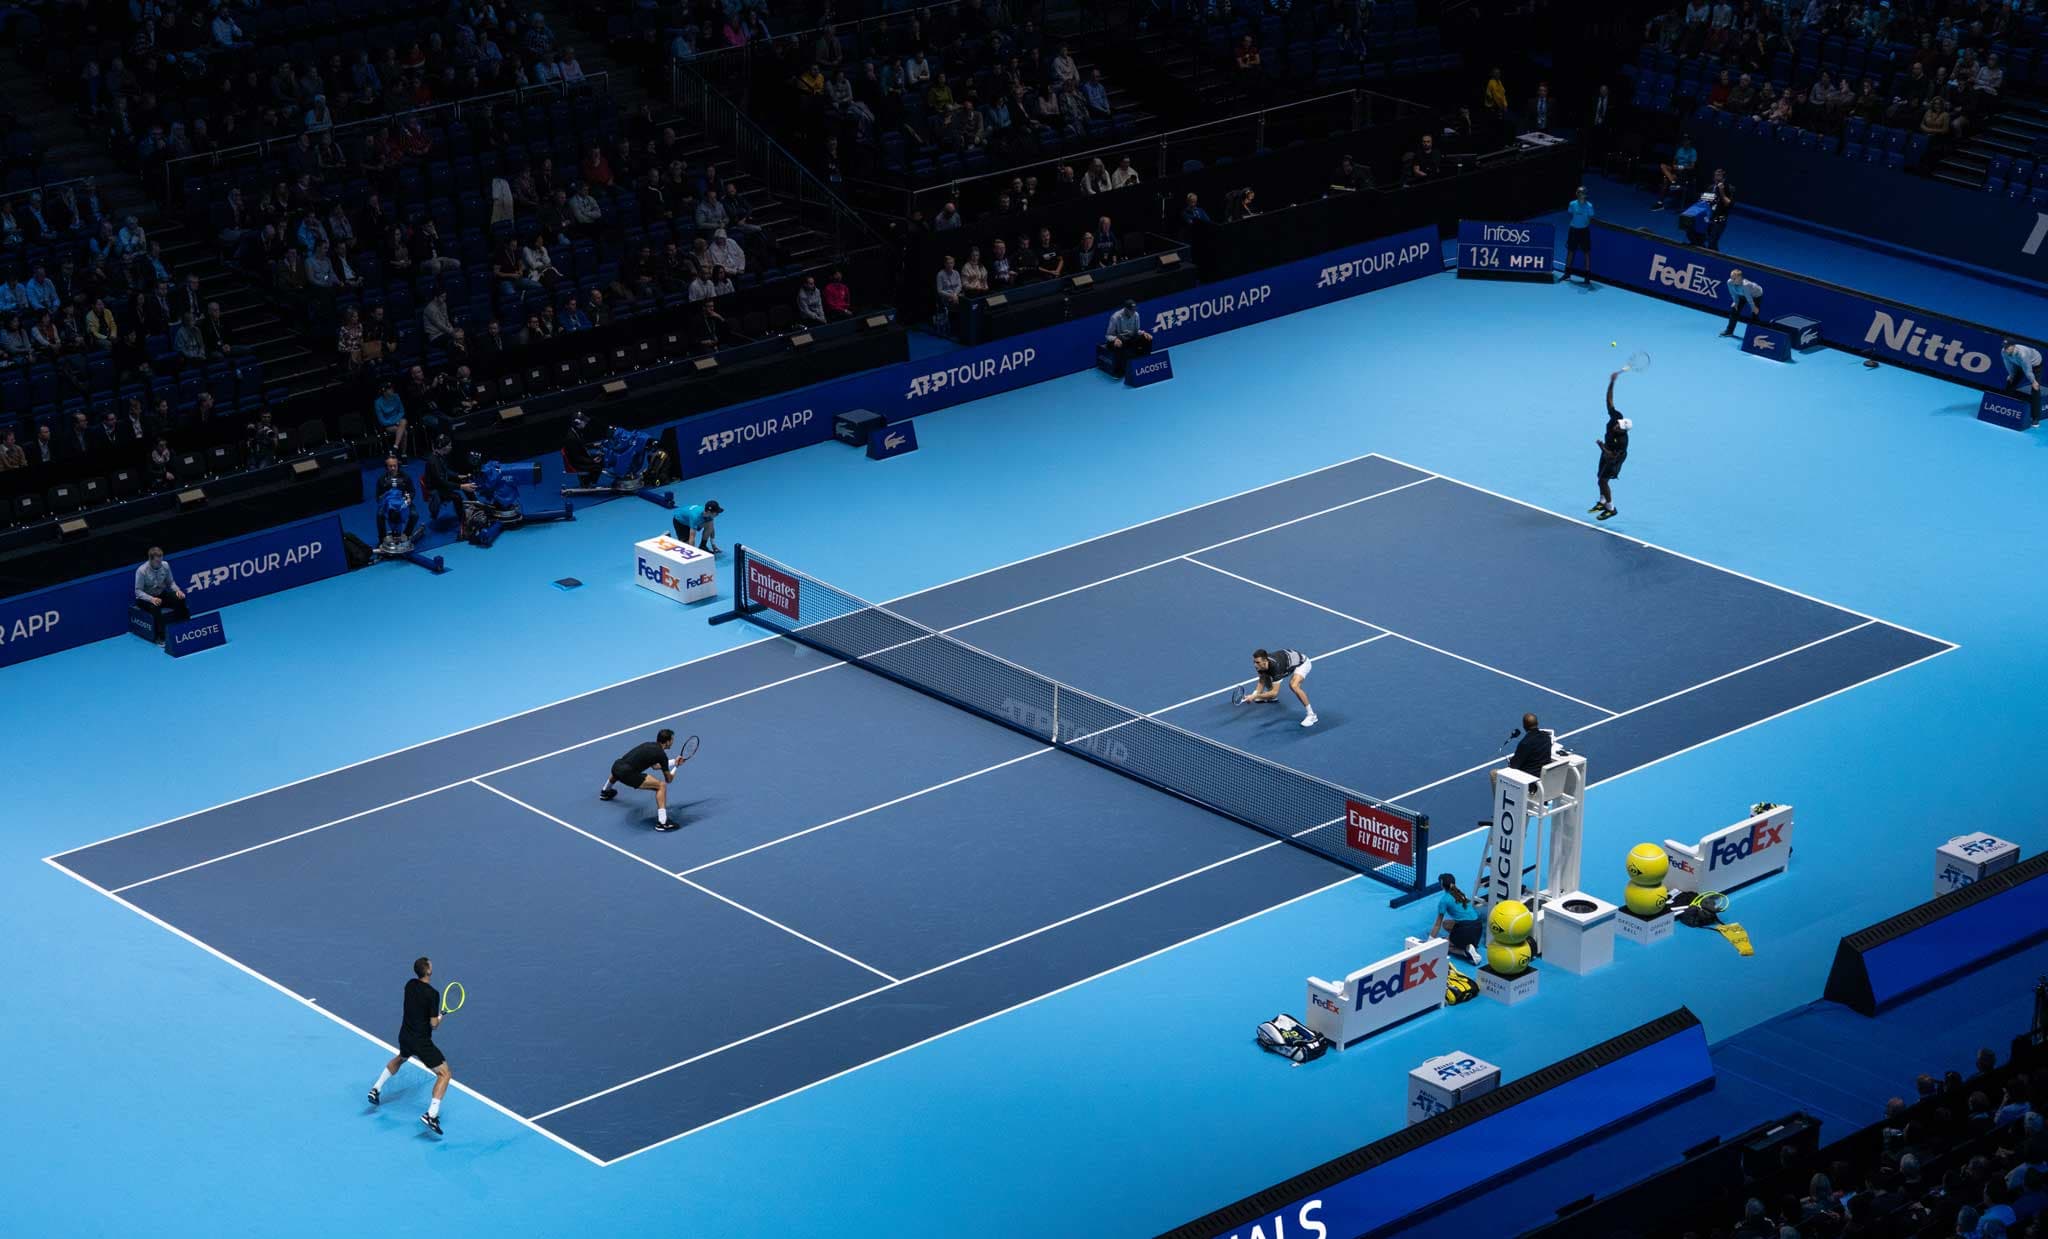 You are currently viewing Top 10 Best Tennis Courts In The World Right Now